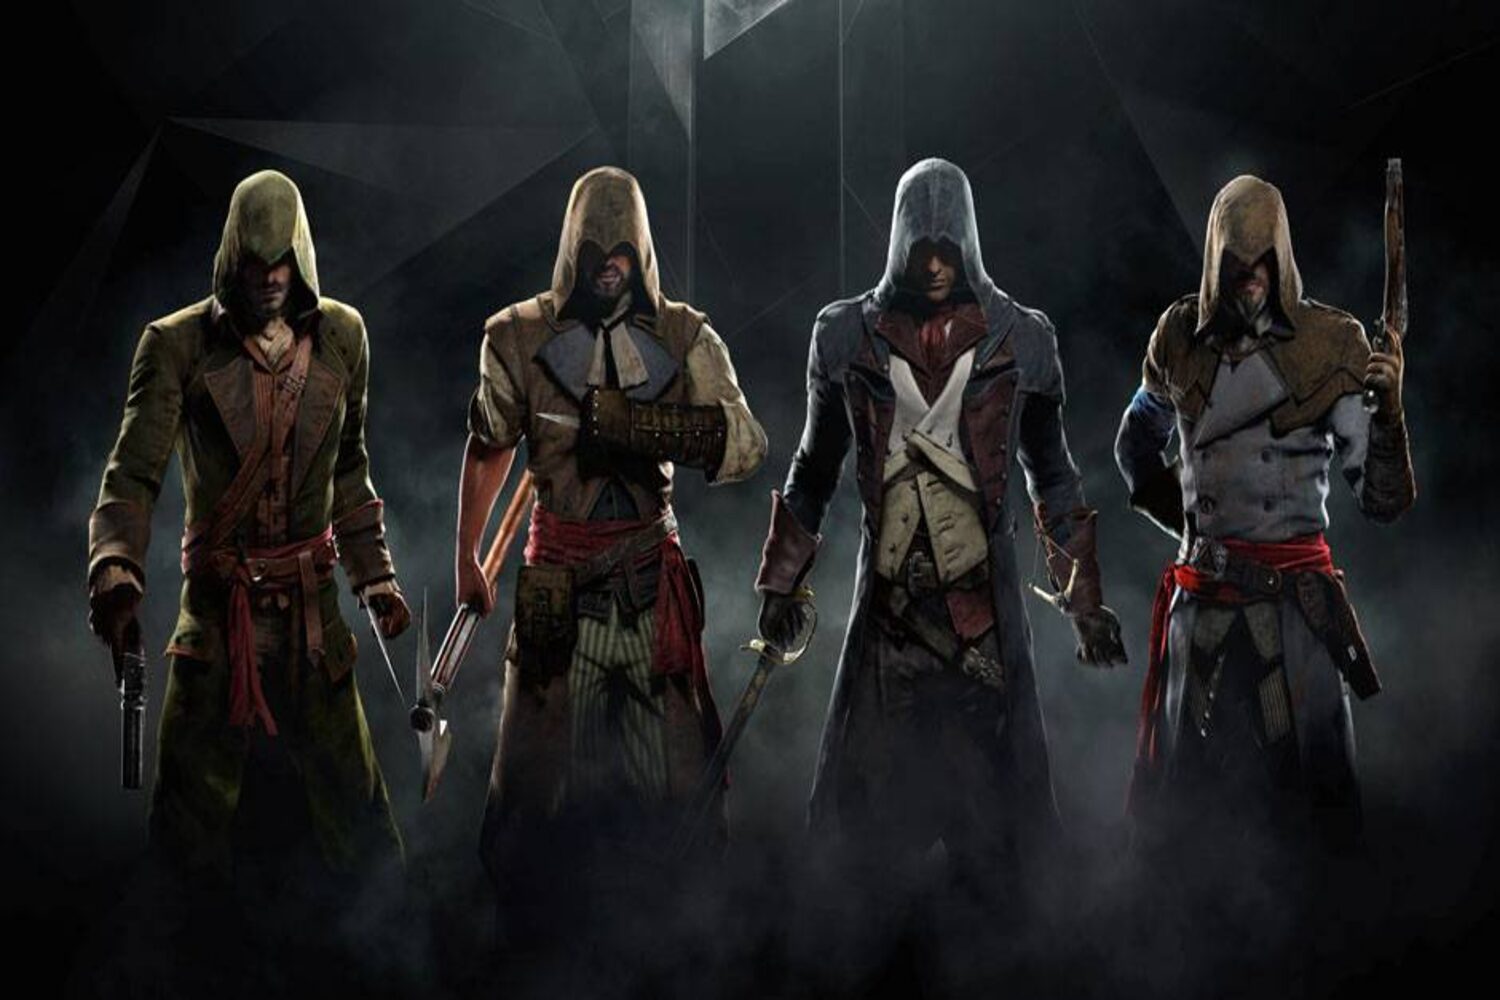 More Assassin's Creed games than reported coming, says Ubisoft - Polygon